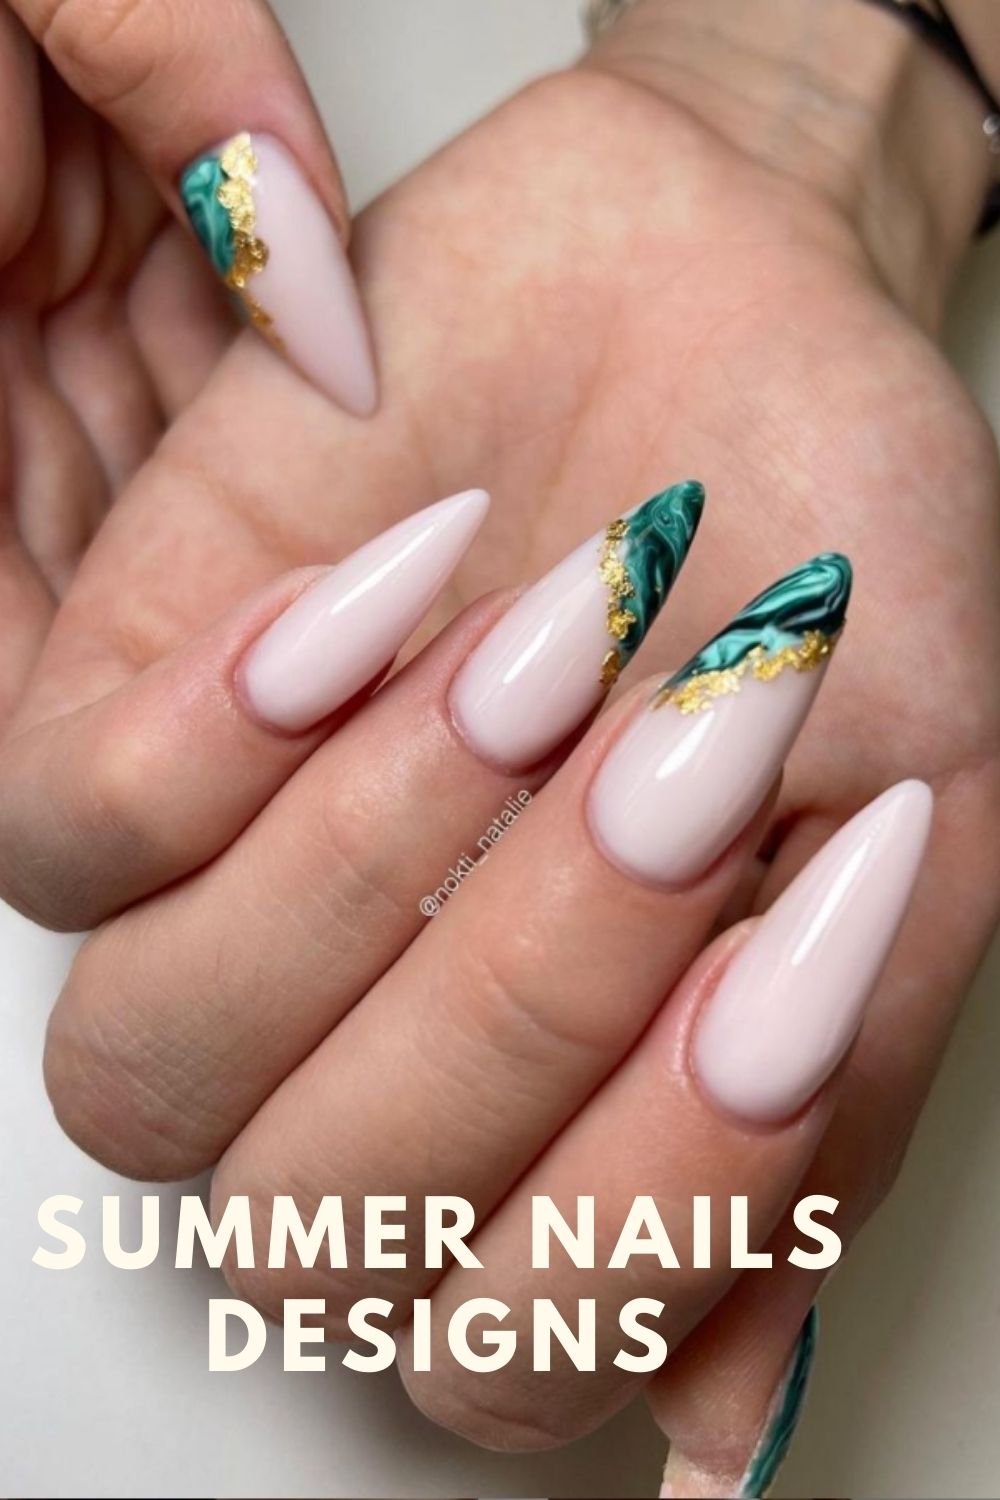 Squoval nails art